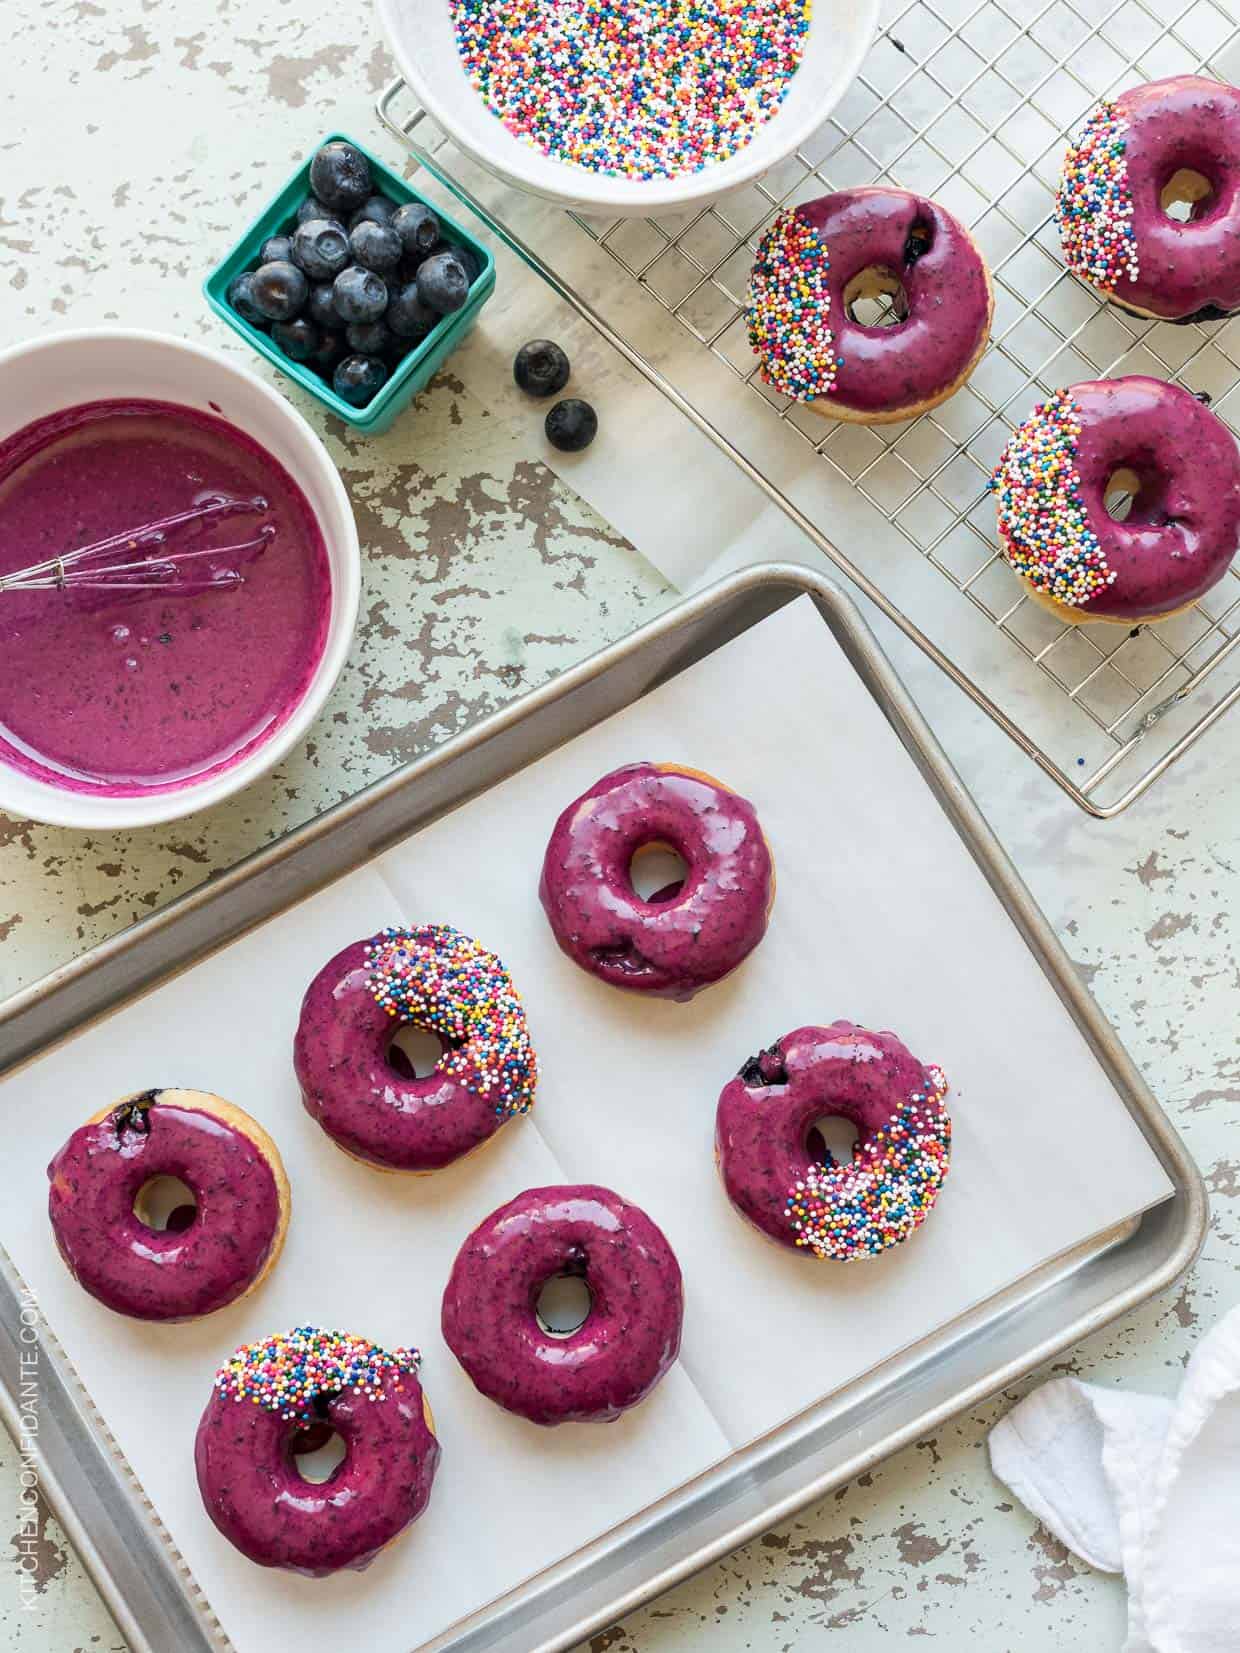 Baking tray of Blueberry Lemon Glazed Baked Donuts with sprinkles on top.